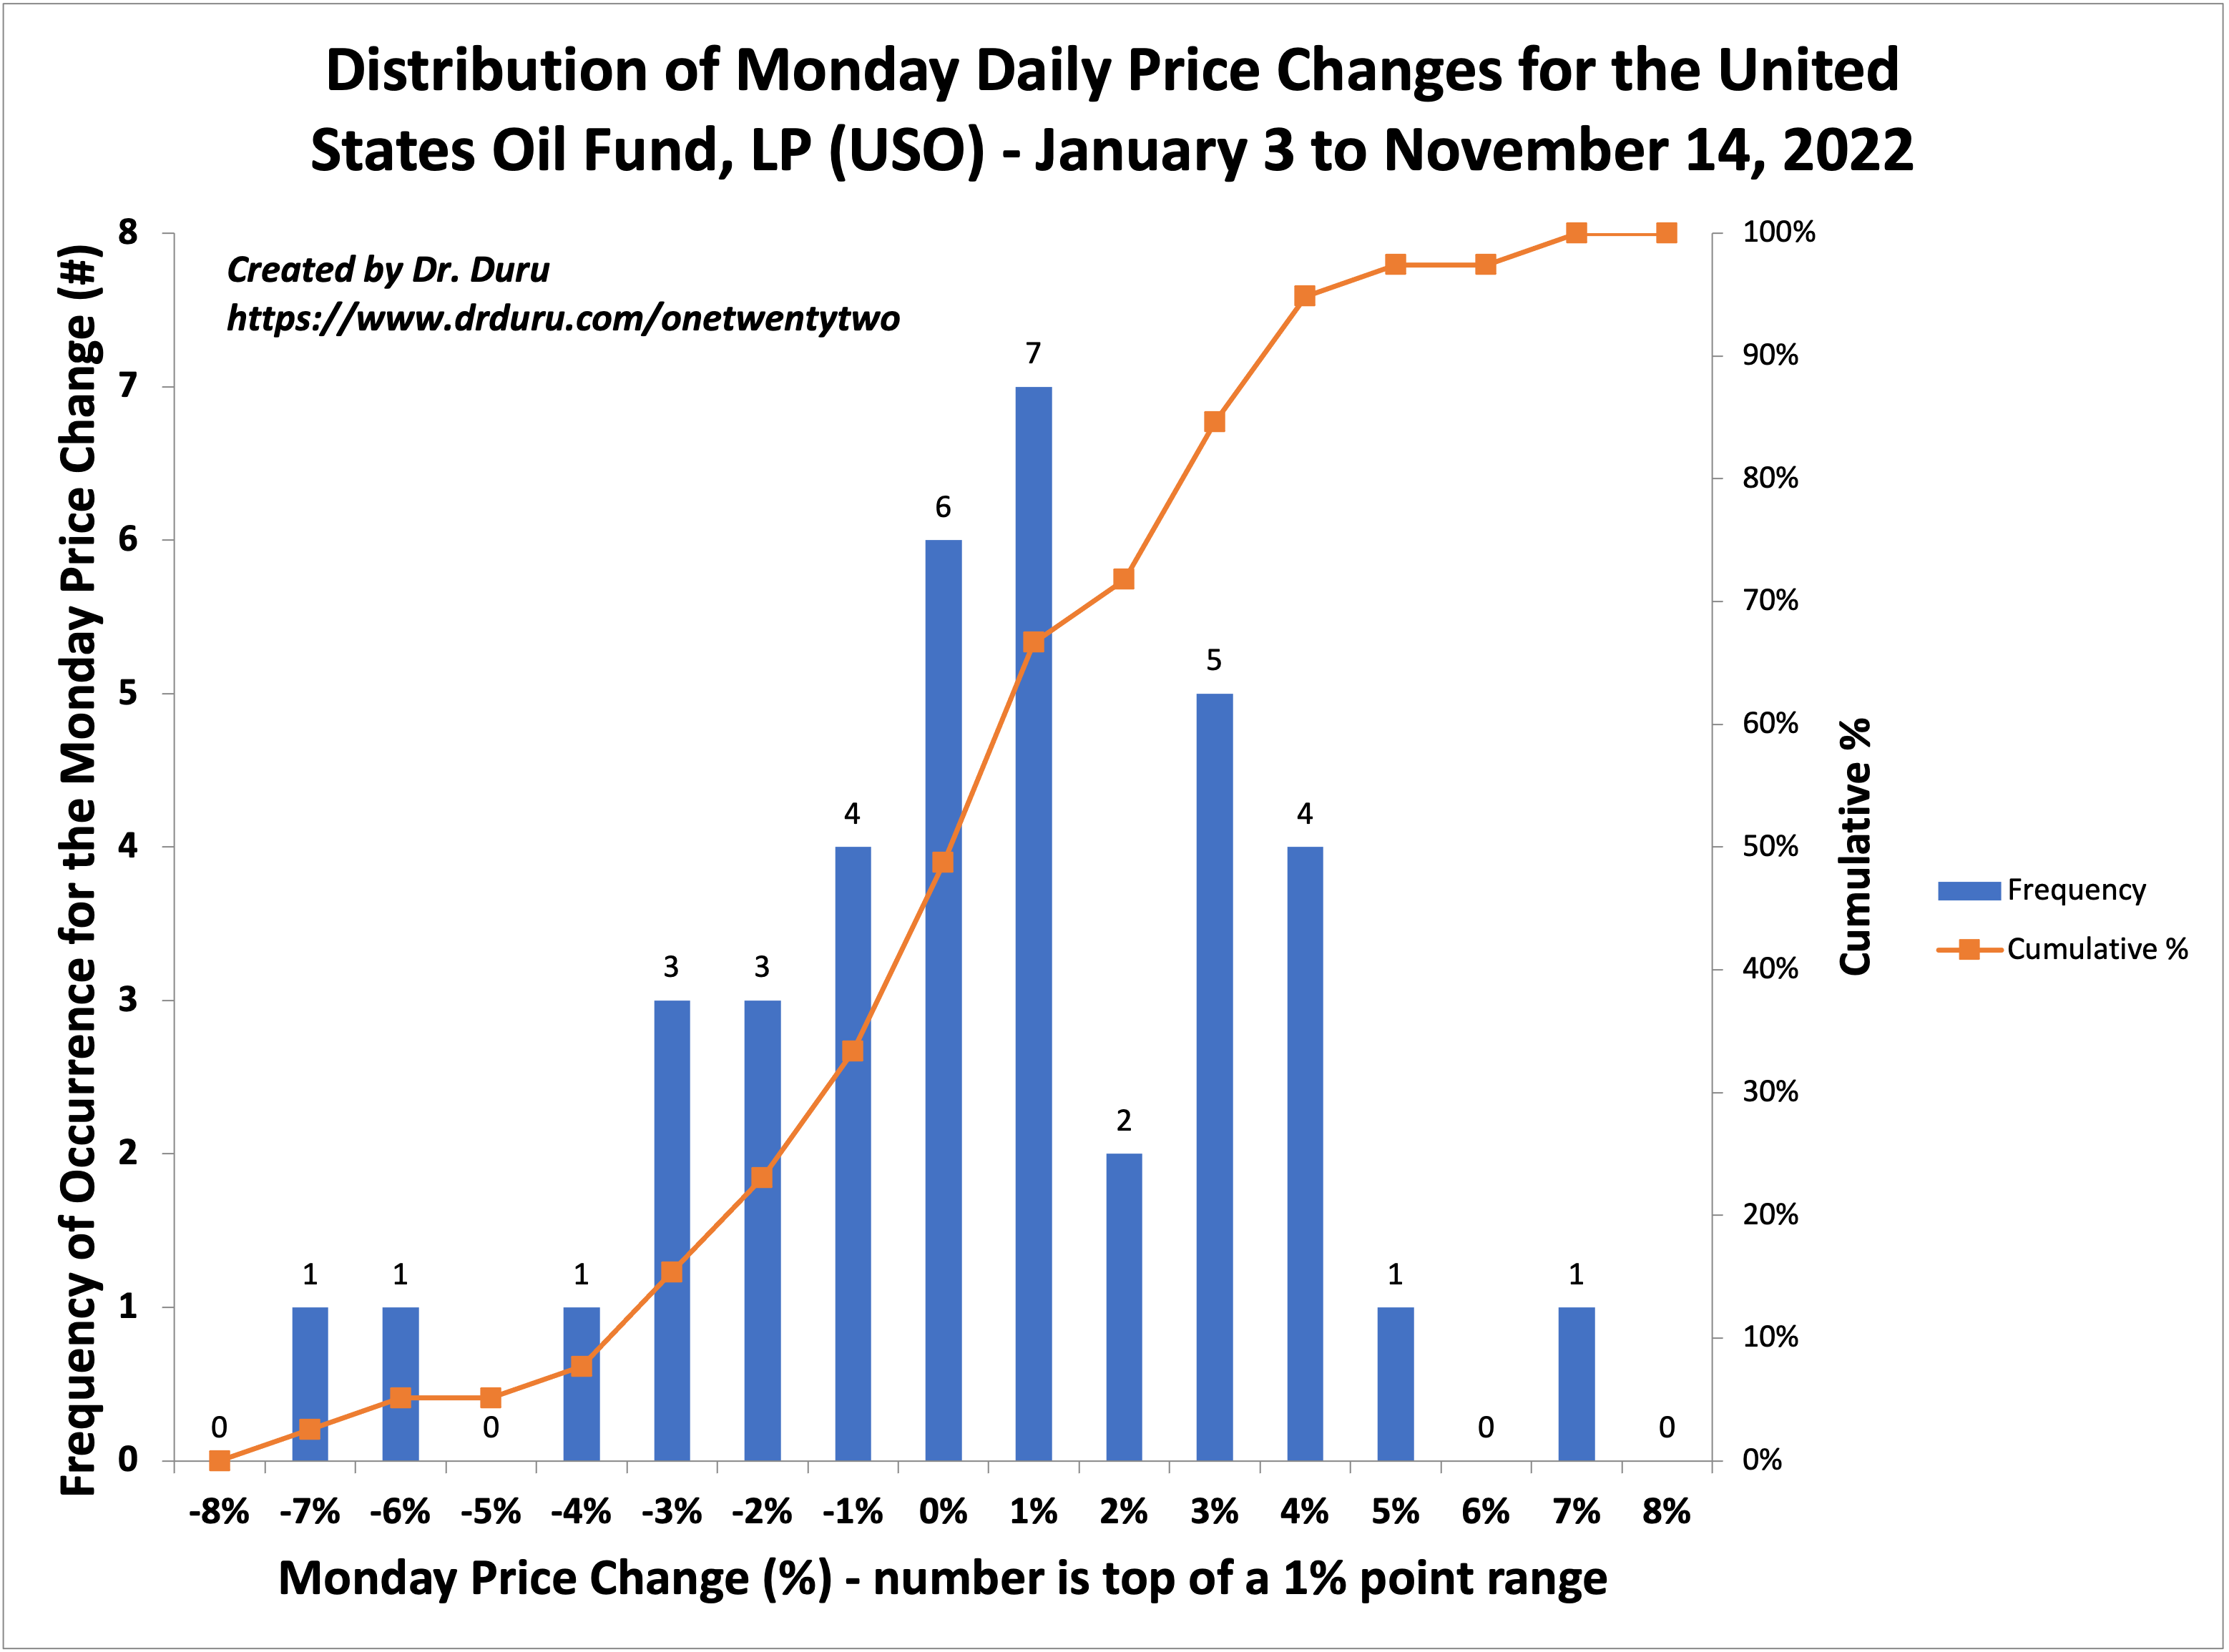 2022 Distribution of Monday Daily Price Changes - United States Oil Fund, LP (USO)